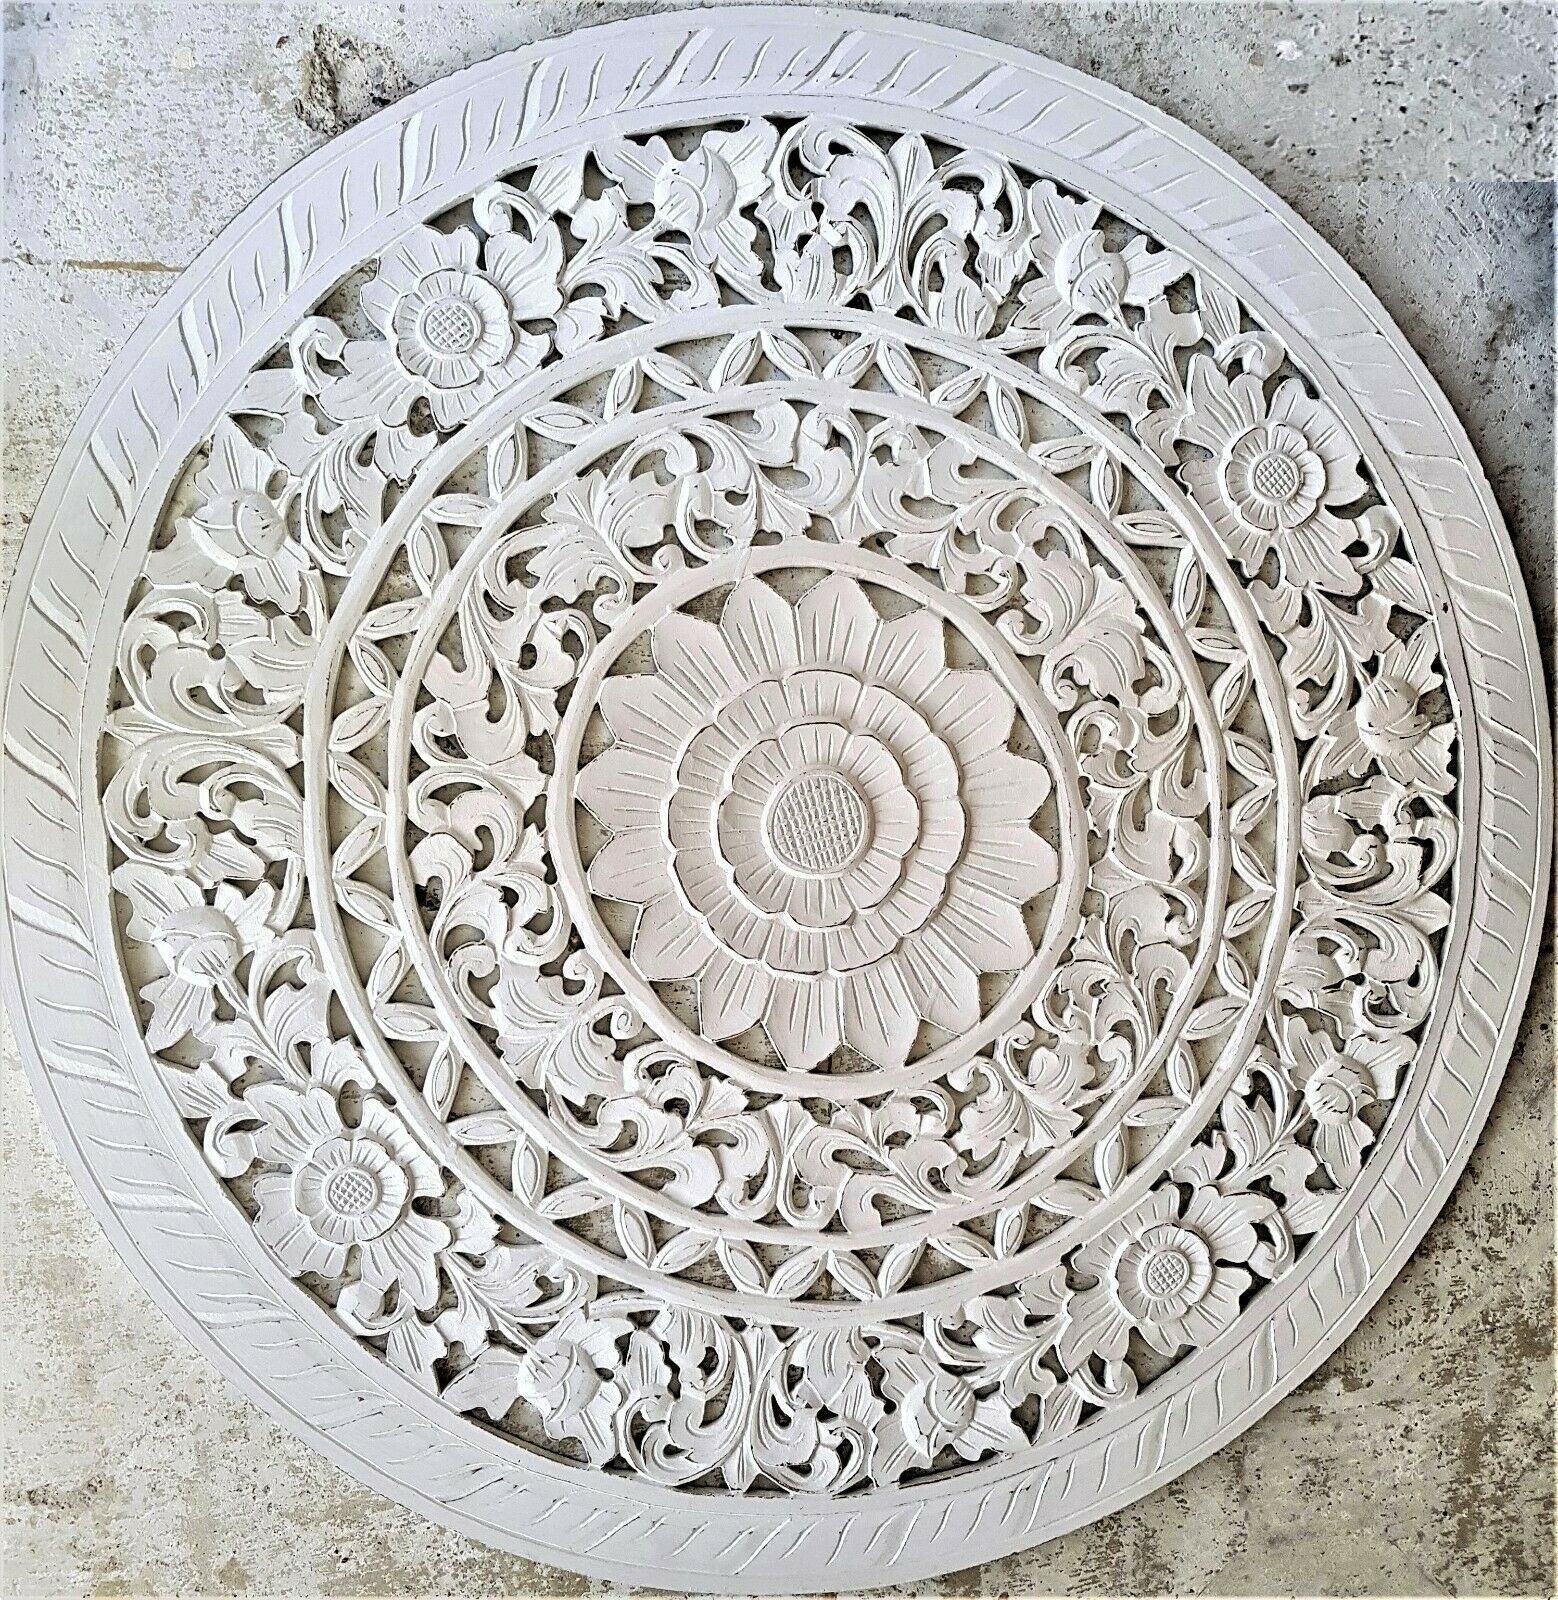 Mandala Shabby Chic White Wall Art Hanging Wood Panel Intended For Tropical Wood Wall Art (View 1 of 15)